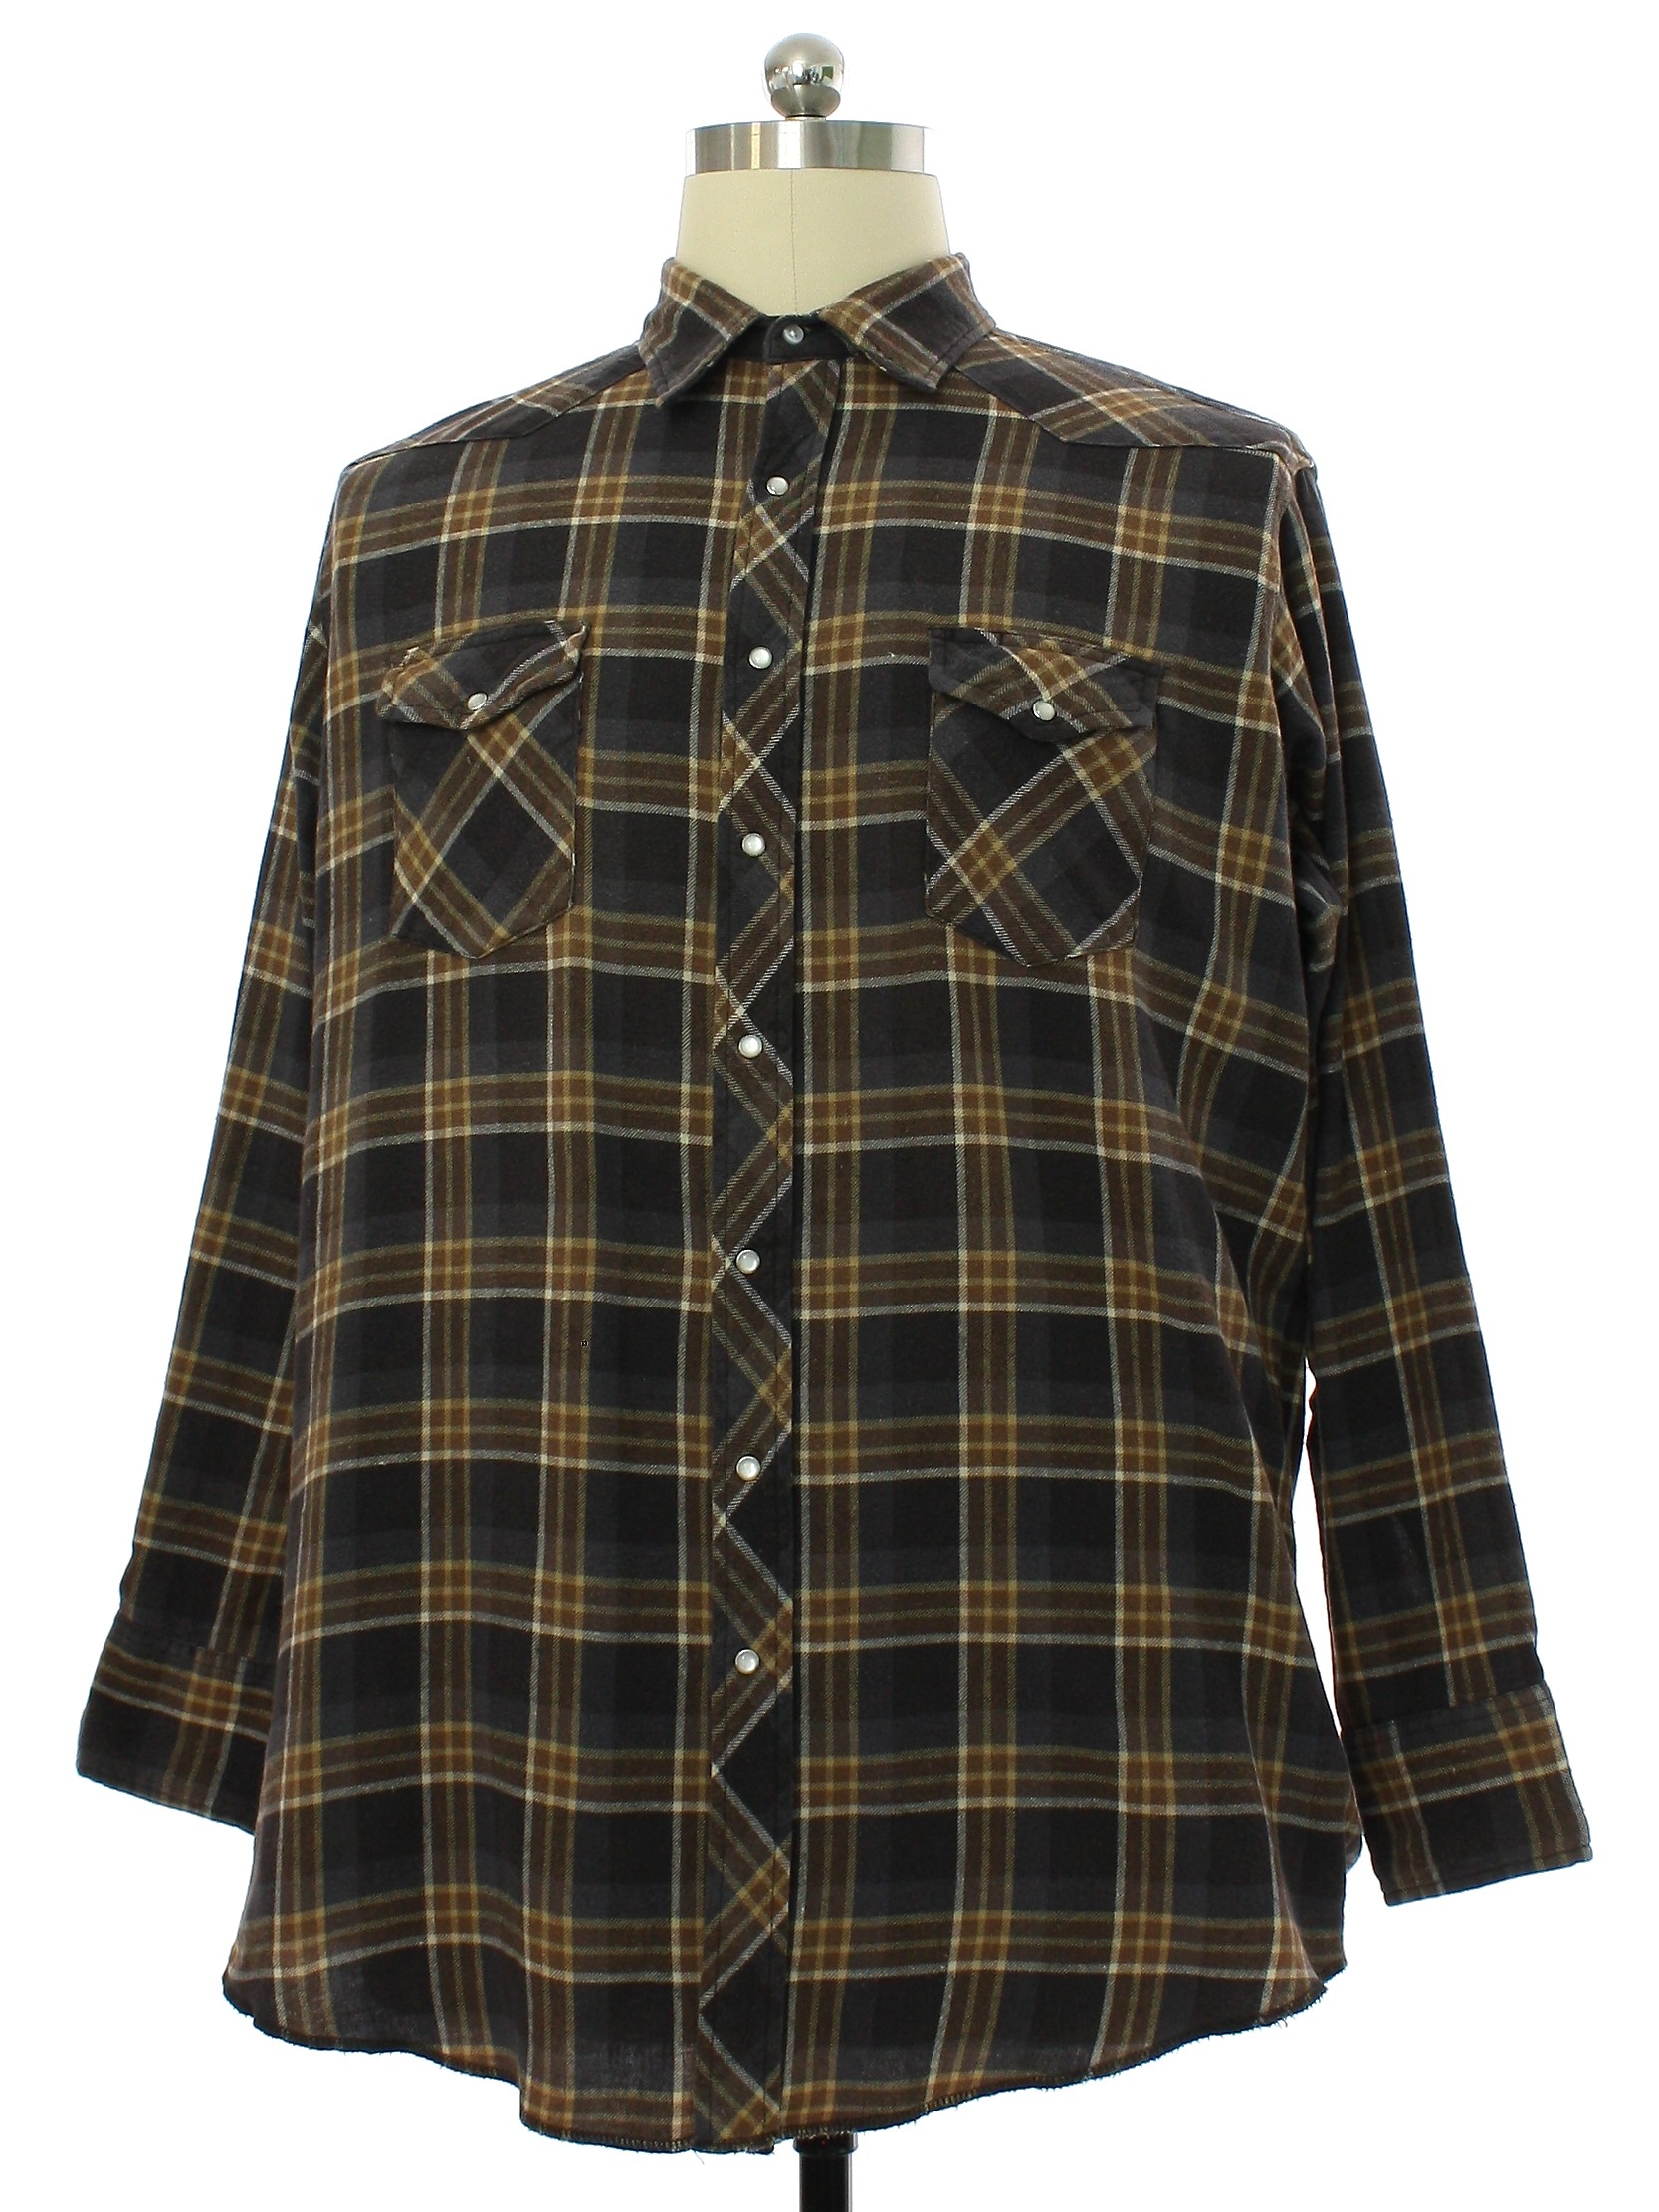 Wrangler 90's Vintage Western Shirt: 90s or newer -Wrangler- Mens shades of  brown, gray, black, and yellow plaid cotton flannel longsleeve flannel  western shirt. pearlized snaps at front placket and cuffs. Fold